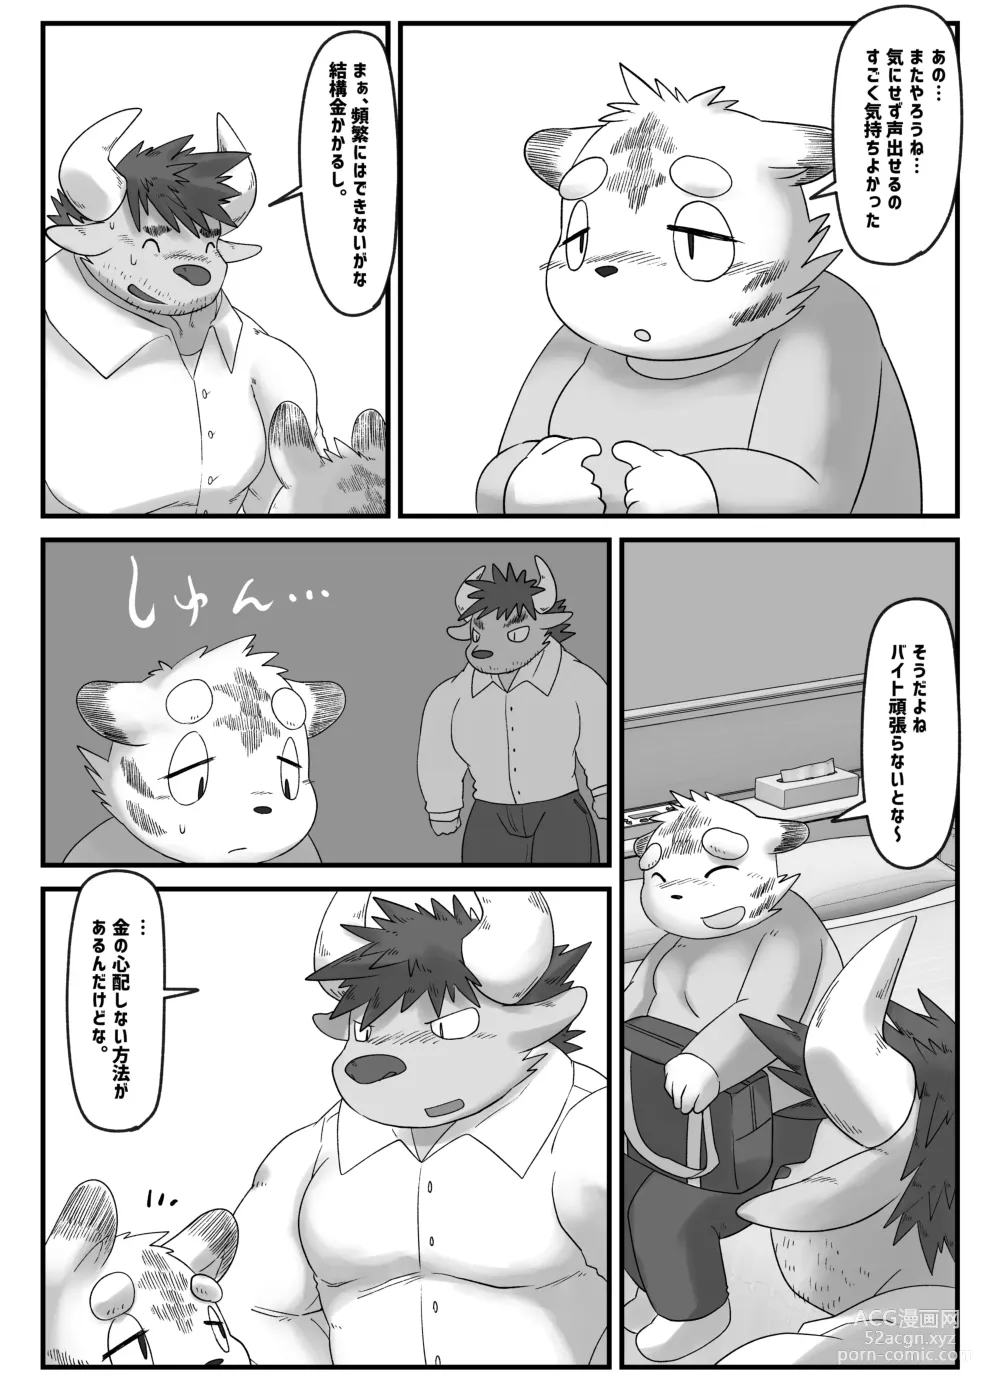 Page 31 of doujinshi Muscular Bull Teacher & Chubby Tiger Student 4